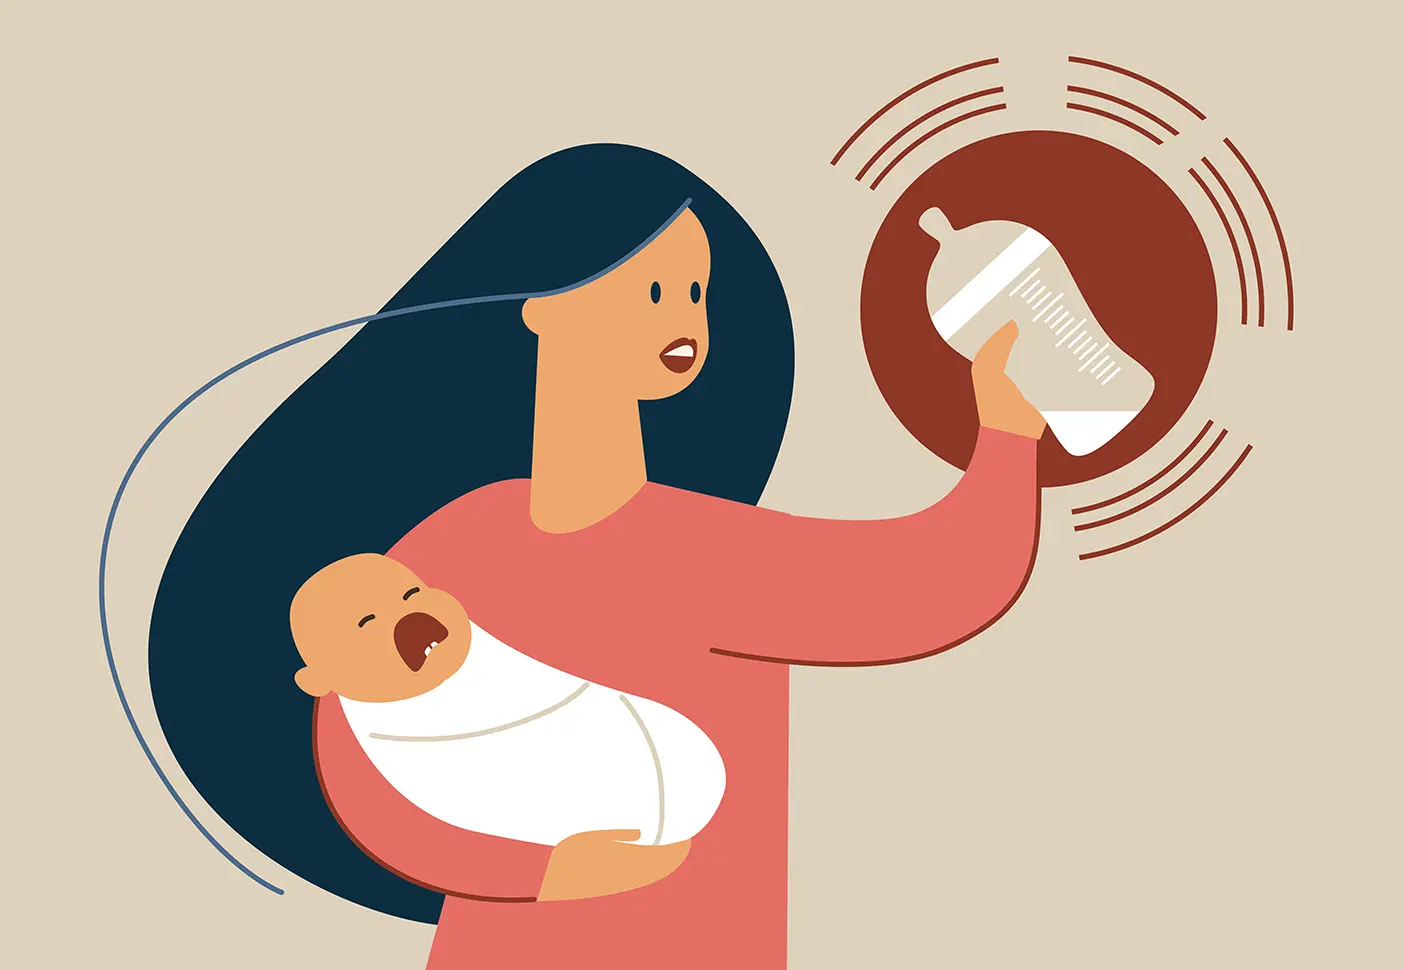 An illustration of a mom holding a crying baby and a nearly empty bottle of formula.